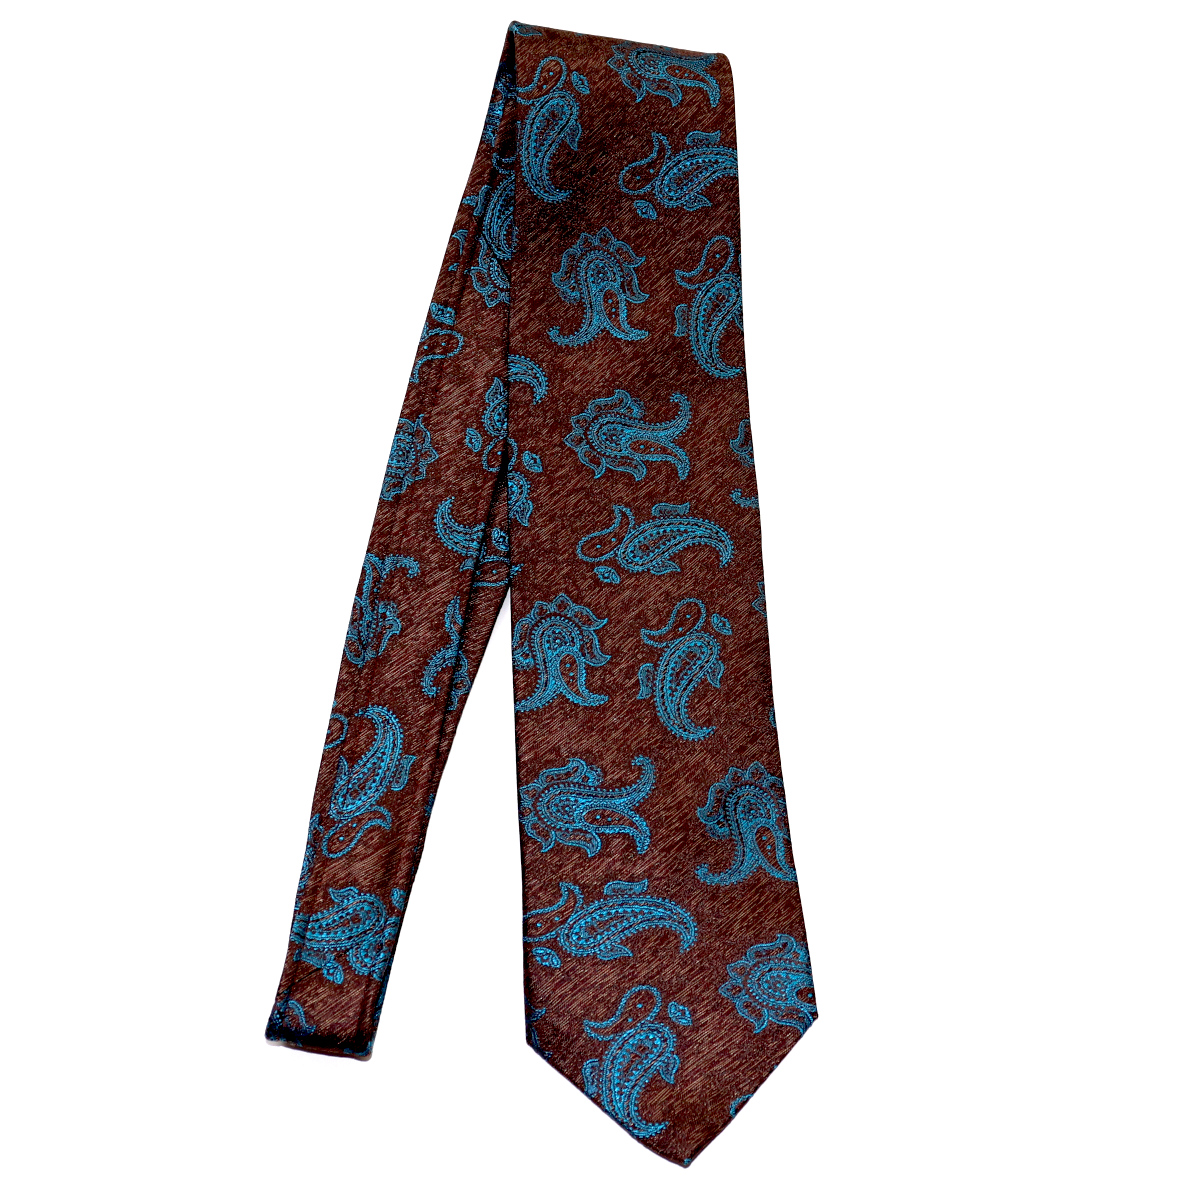 Sartorial woven silk paisley tie, warm brown and turquoise pattern ...